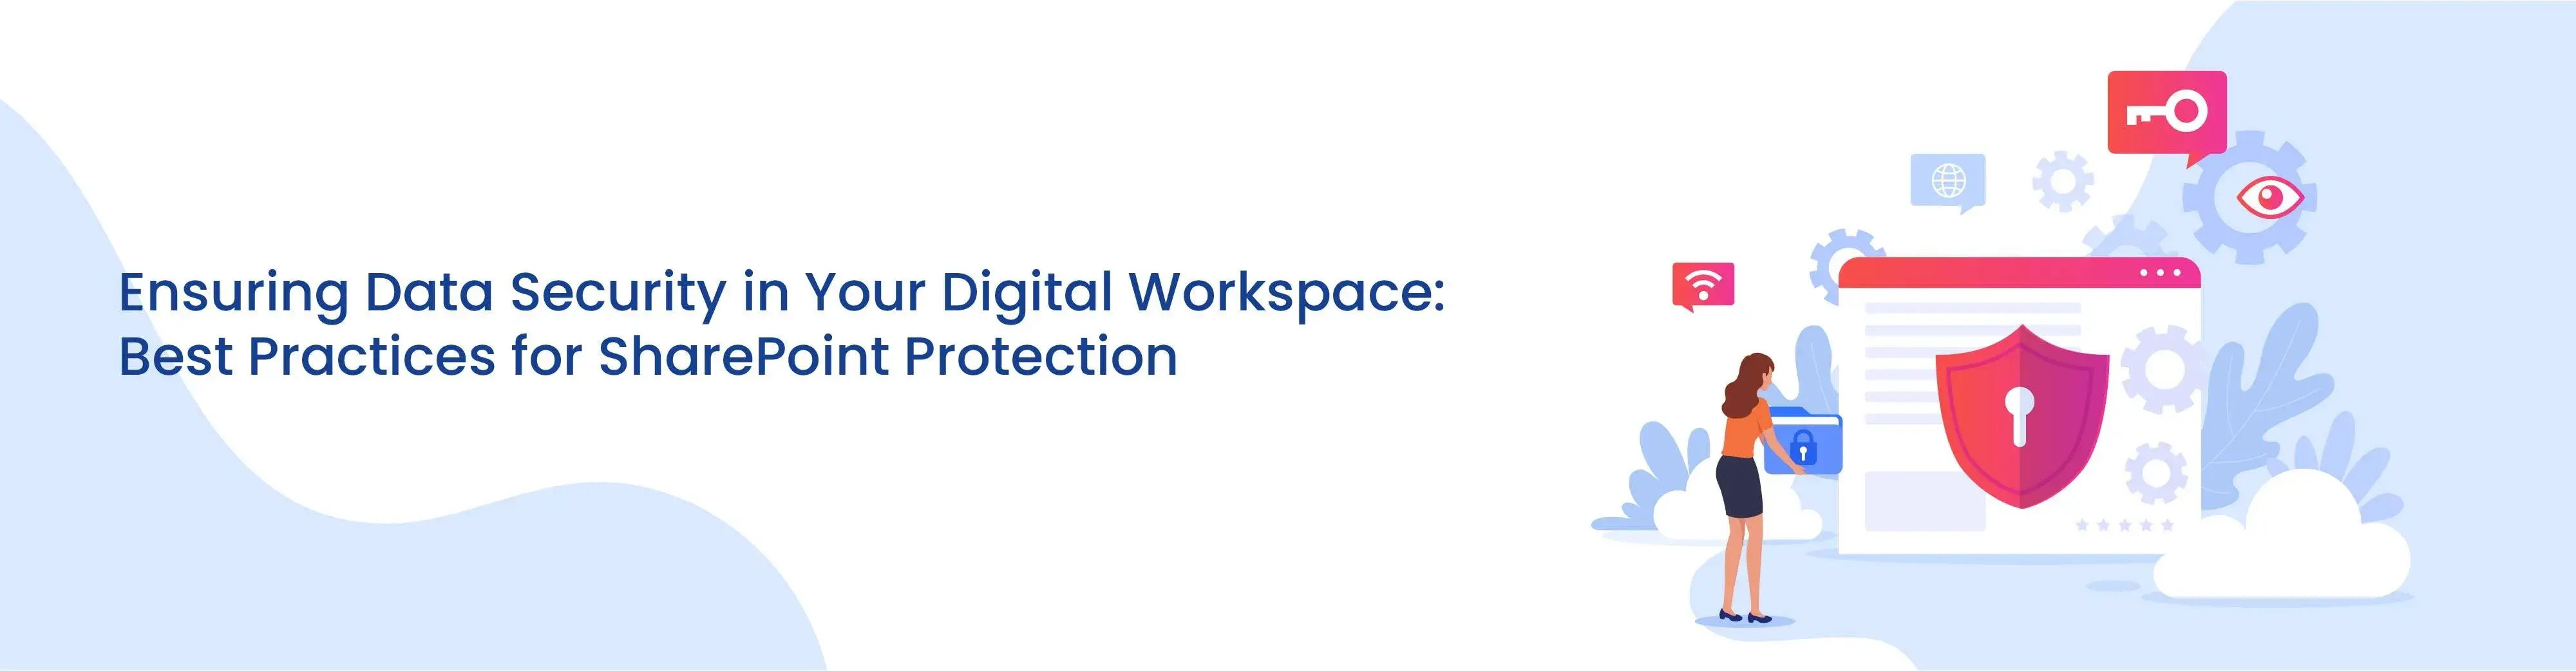 1712297517Ensuring Data Security in Your Digital Workspace Best Practices for SharePoint Protection.webp